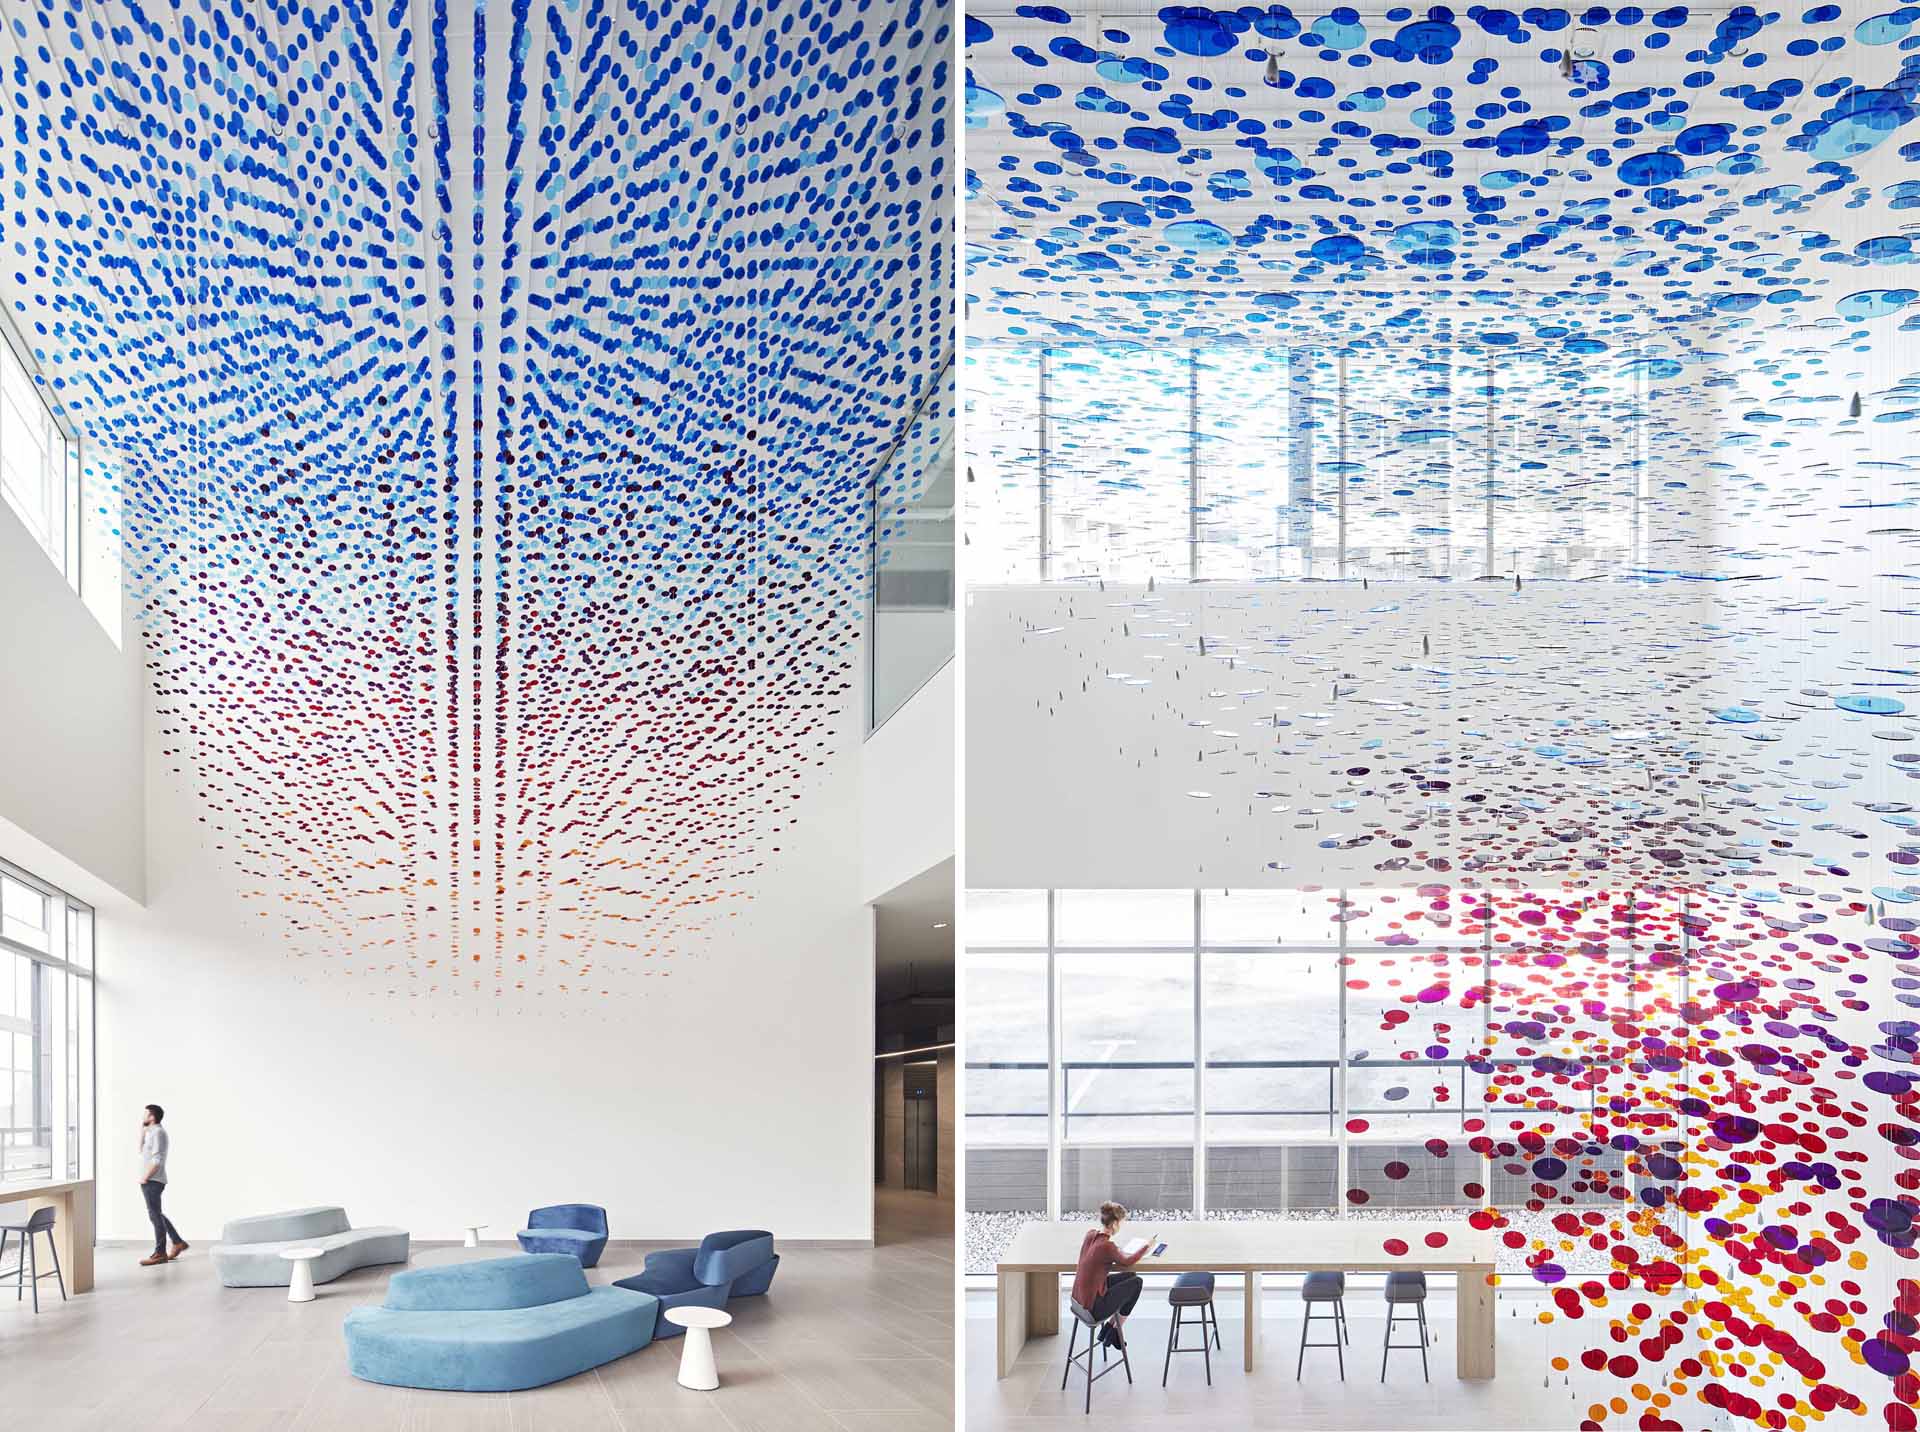 A custom-installation in a lobby atrium is made from 8,000 colorful discs suspended from 650 wire cables.